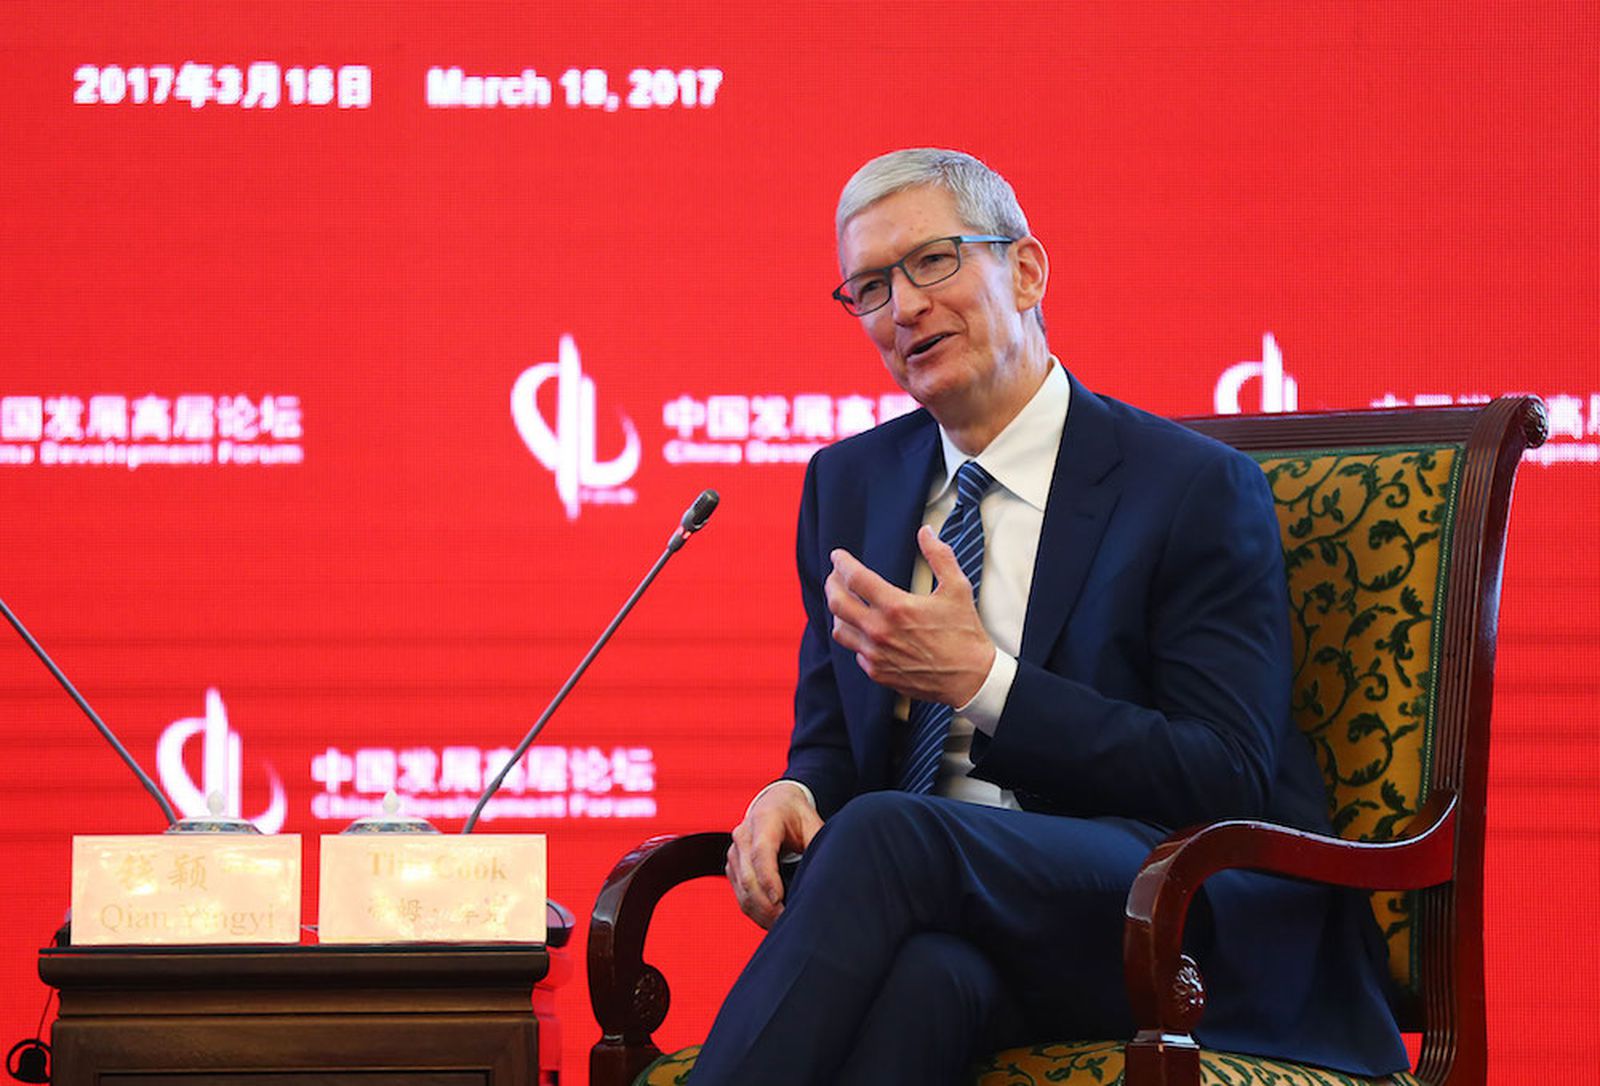 Apple CEO Tim Cook 'Secretly' Signed $275 Billion Deal With China in 2016